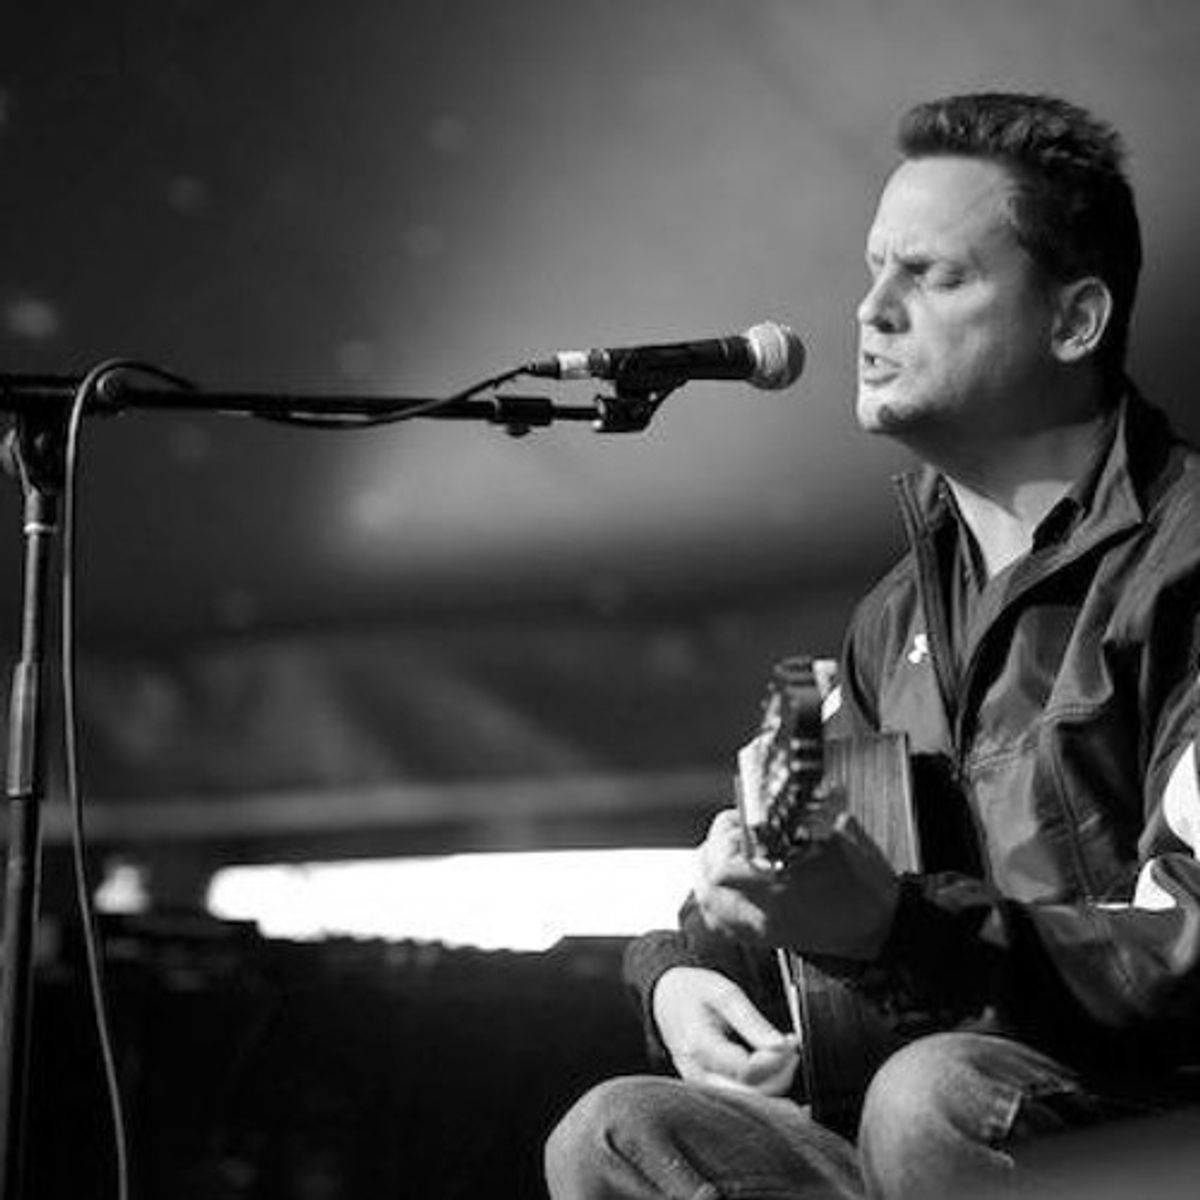 #Namecheck - Sun Kil Moon - I watched The film The Song Remains The Same